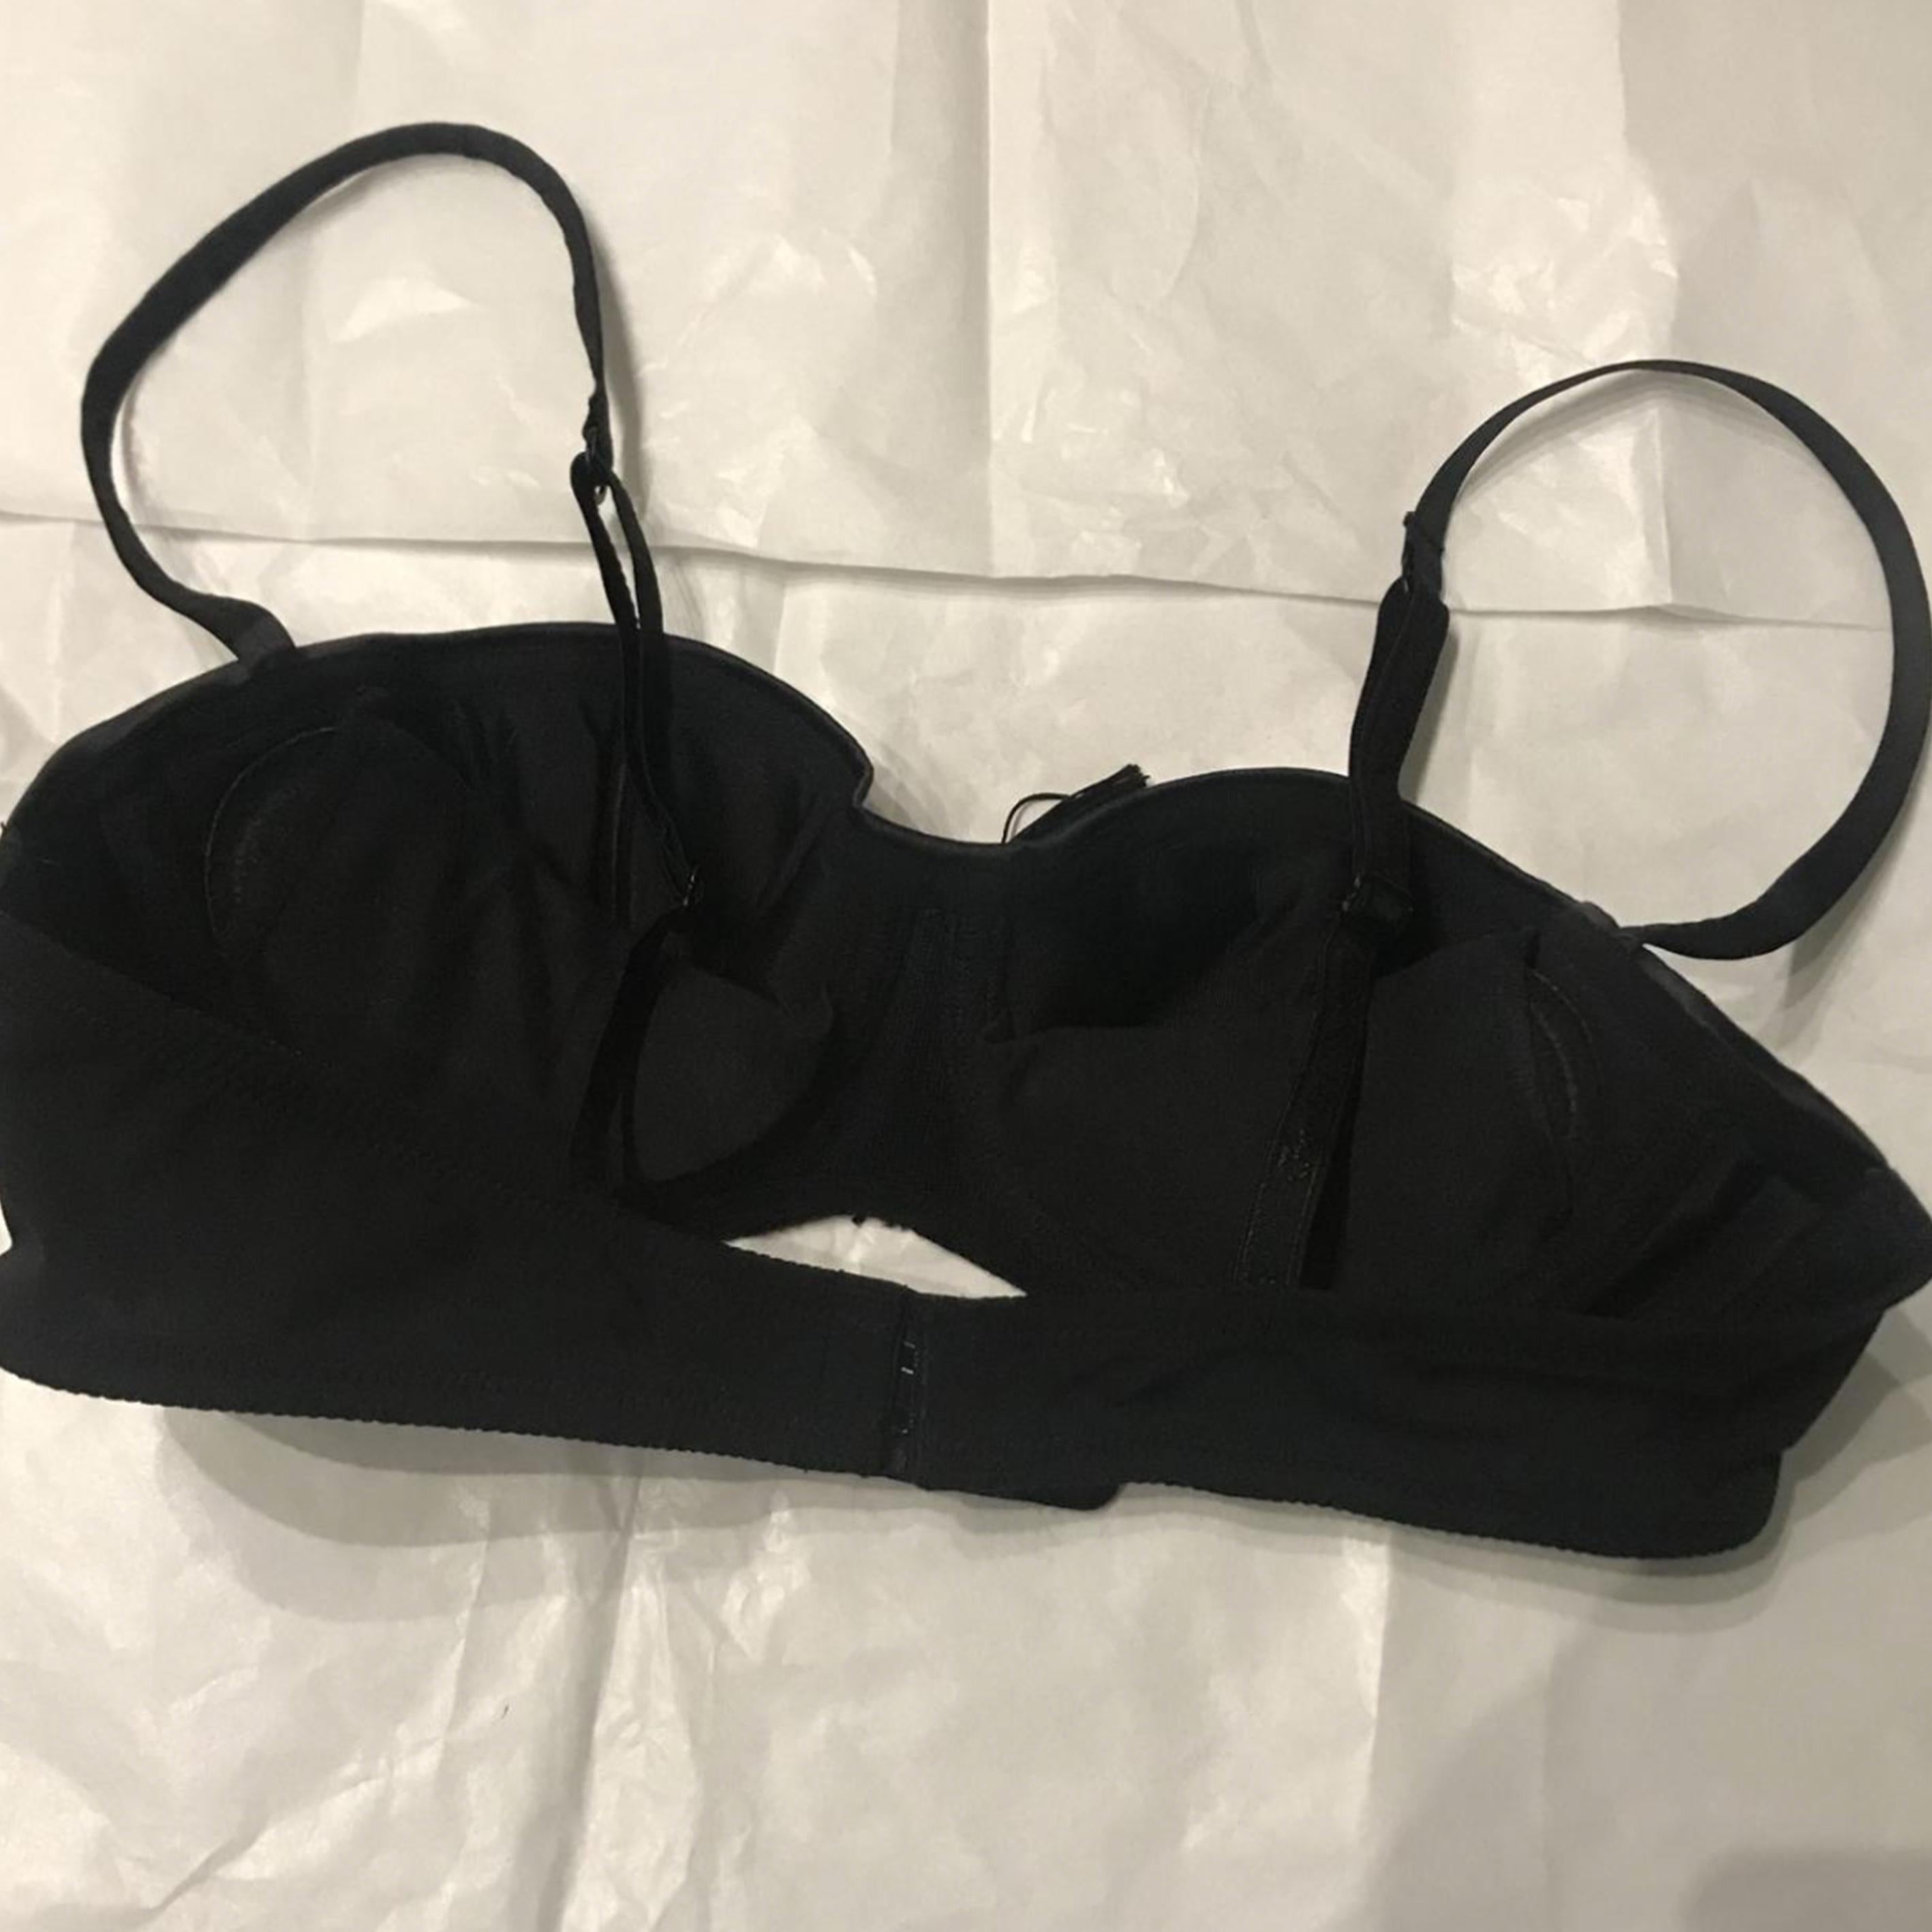 CHANTAL THOMASS Bra Black and white with fringes In Good Condition For Sale In Paris, FR